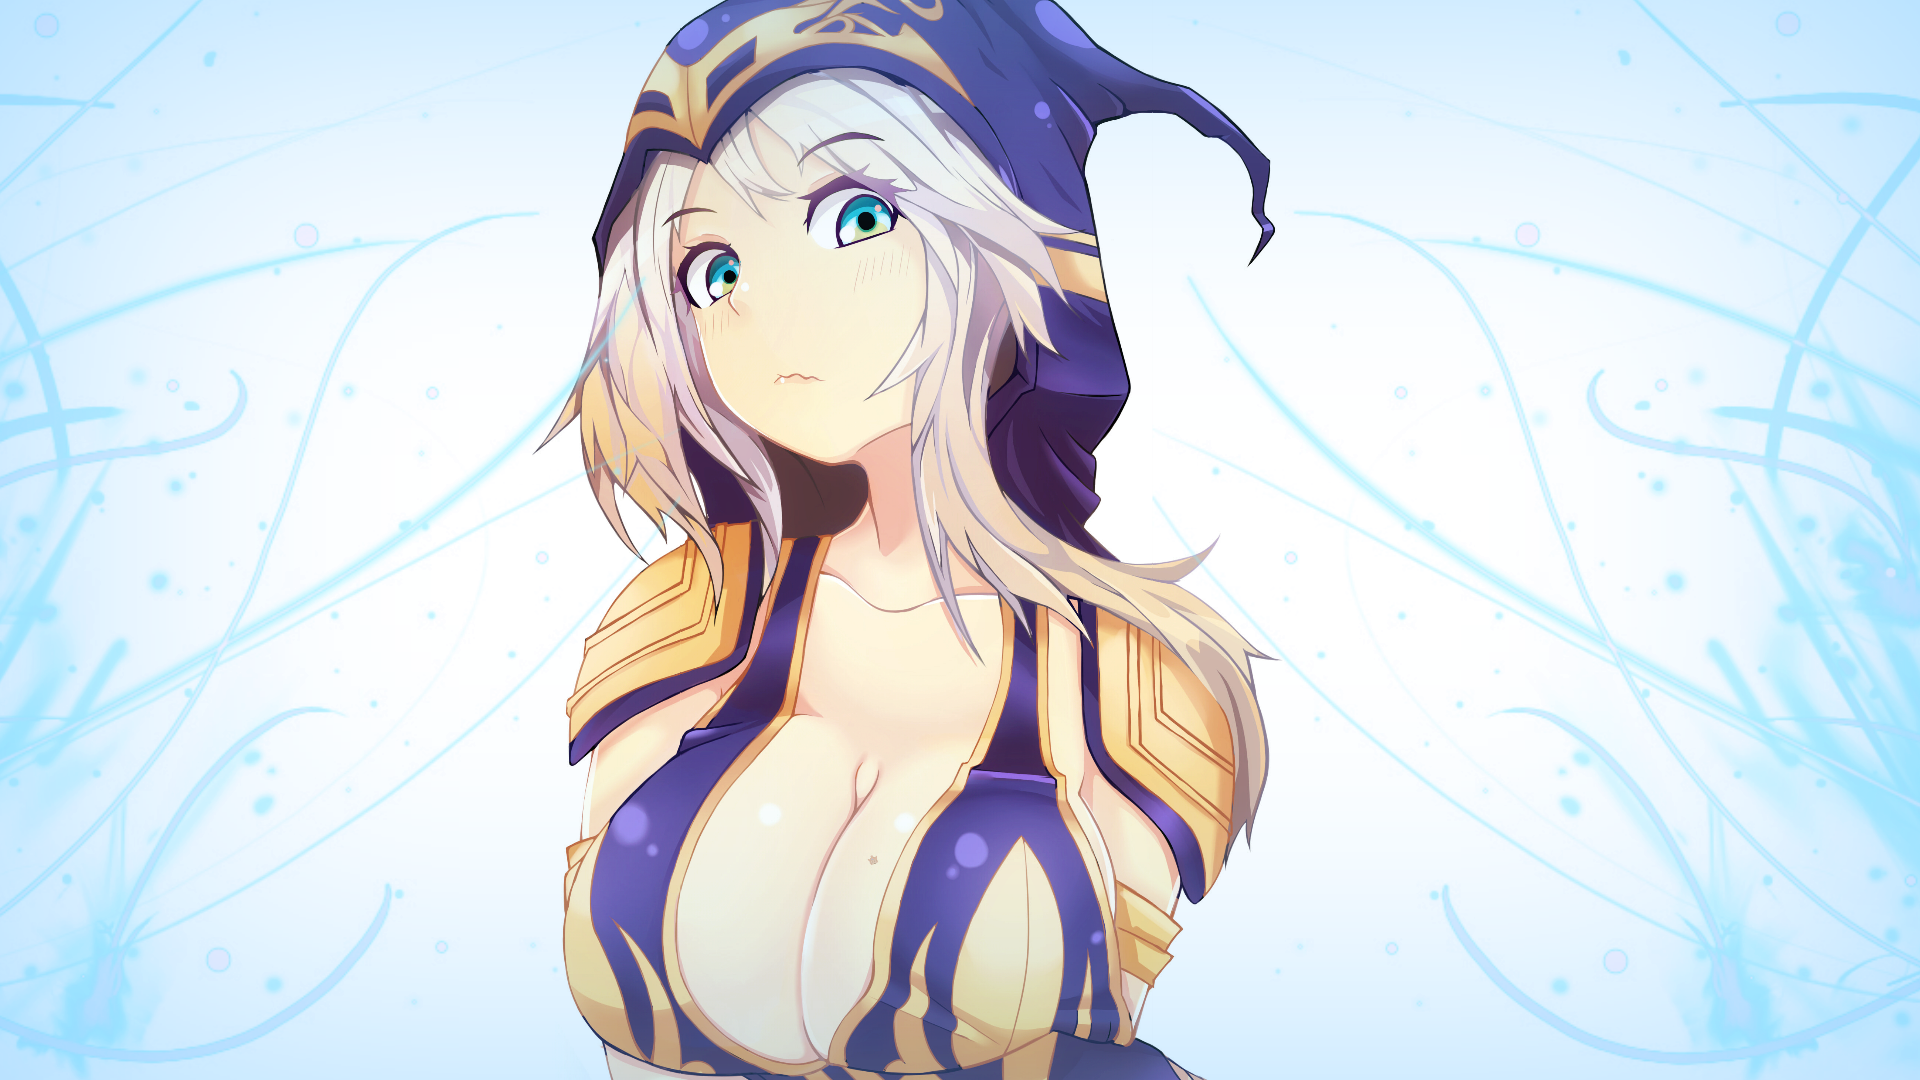 Anime 1920x1080 anime League of Legends Ashe (League of Legends) PC gaming fan art boobs big boobs huge breasts curvy looking at viewer video game girls video game characters aqua eyes women white background